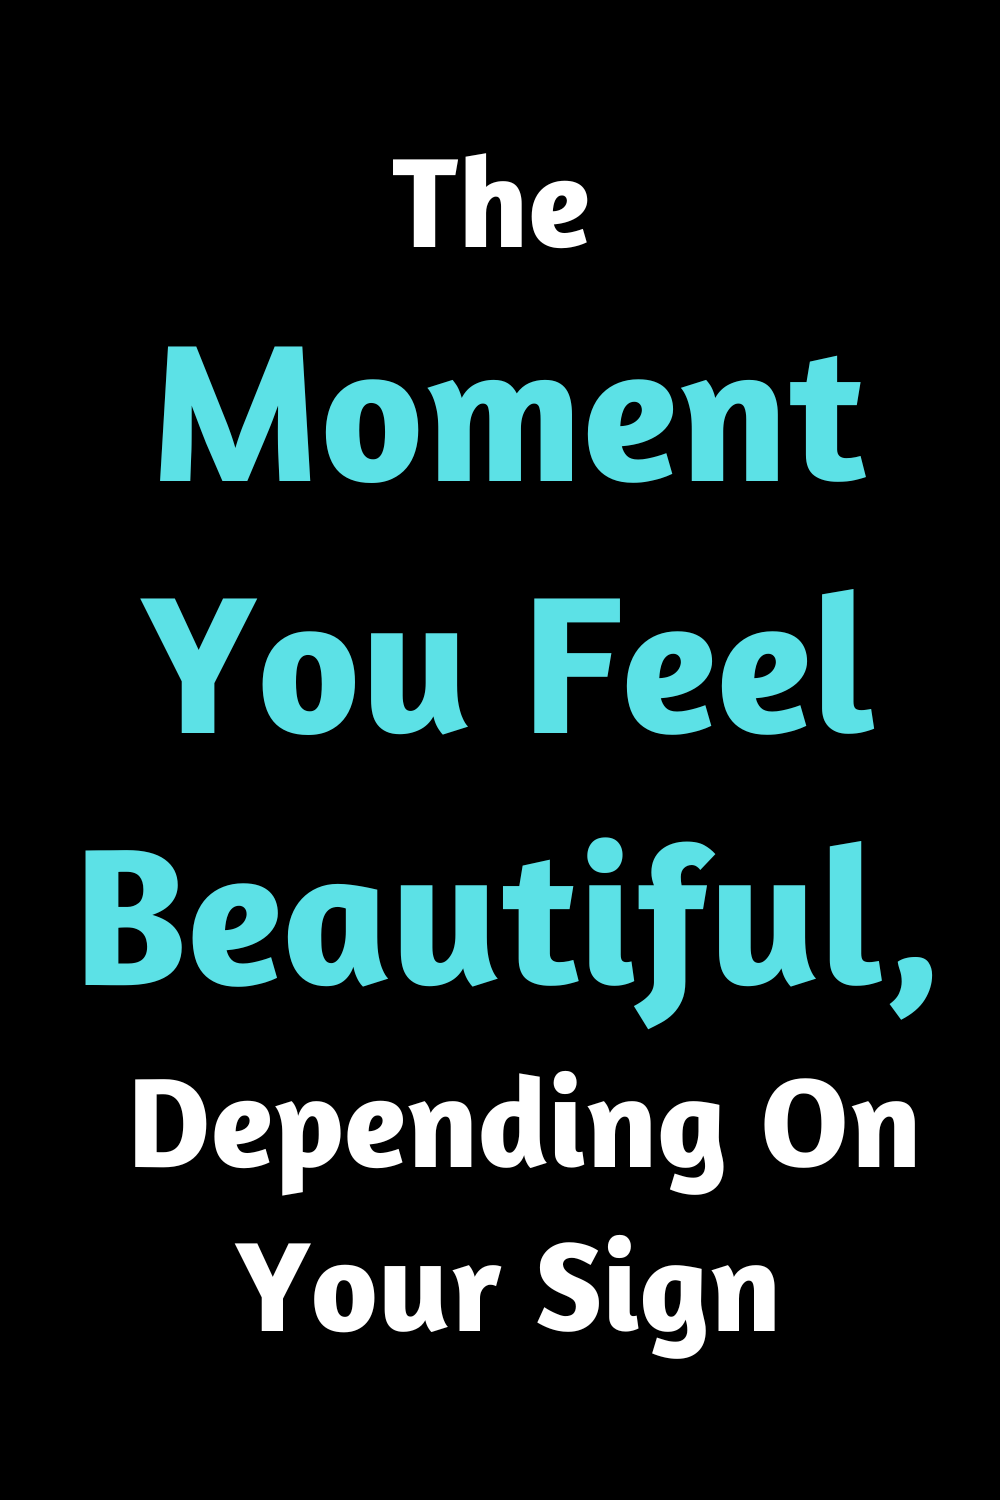 The Moment You Feel Beautiful, Depending On Your Sign